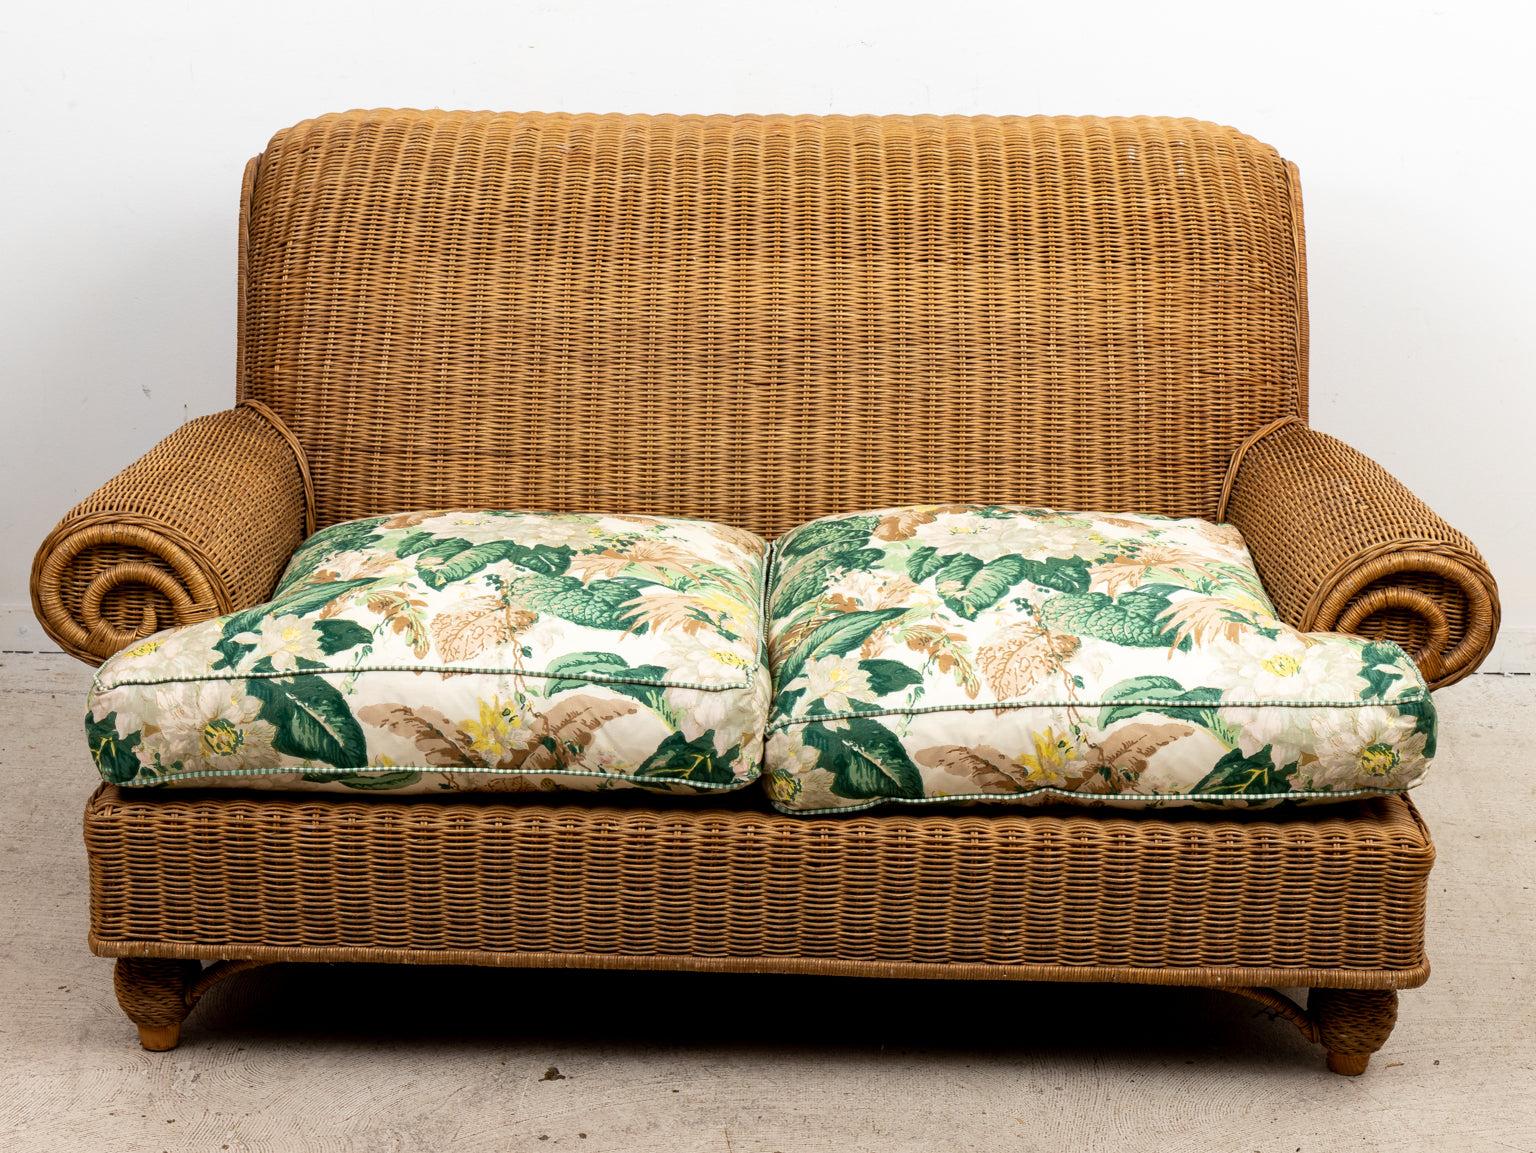 Wicker two-seat sofa with hard rolled arms and back. Two floral upholstered seat cushions and two throw pillows included. Please note of wear consistent with age.